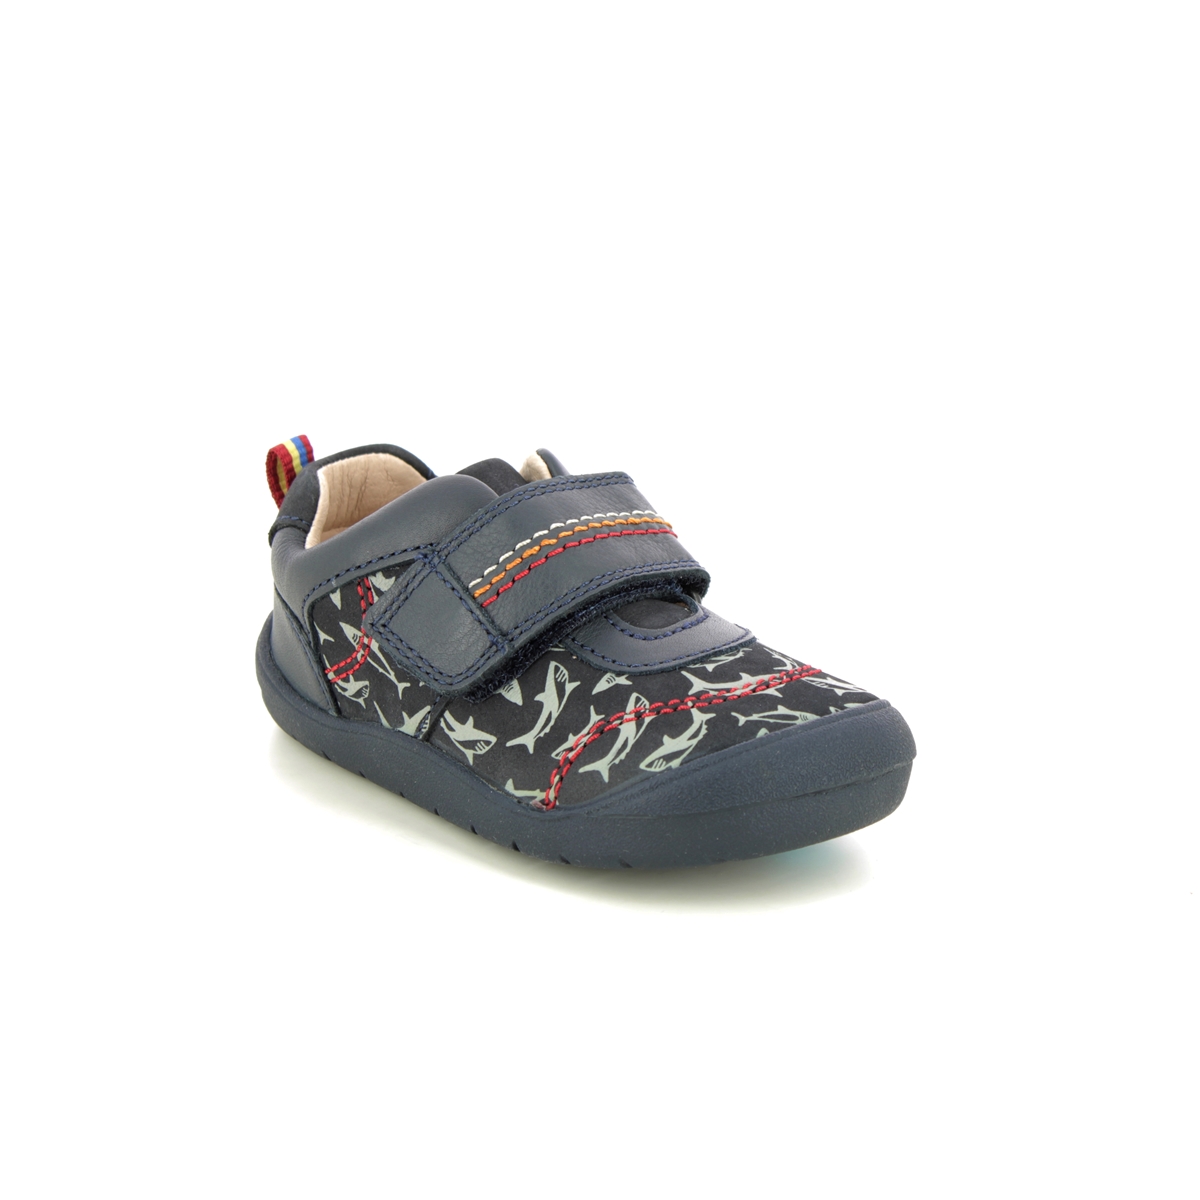 Start Rite - Jaws In Navy Nubuck 0782-96F In Size 6.5 In Plain Navy Nubuck Boys First And Toddler Shoes  In Navy Nubuck For kids